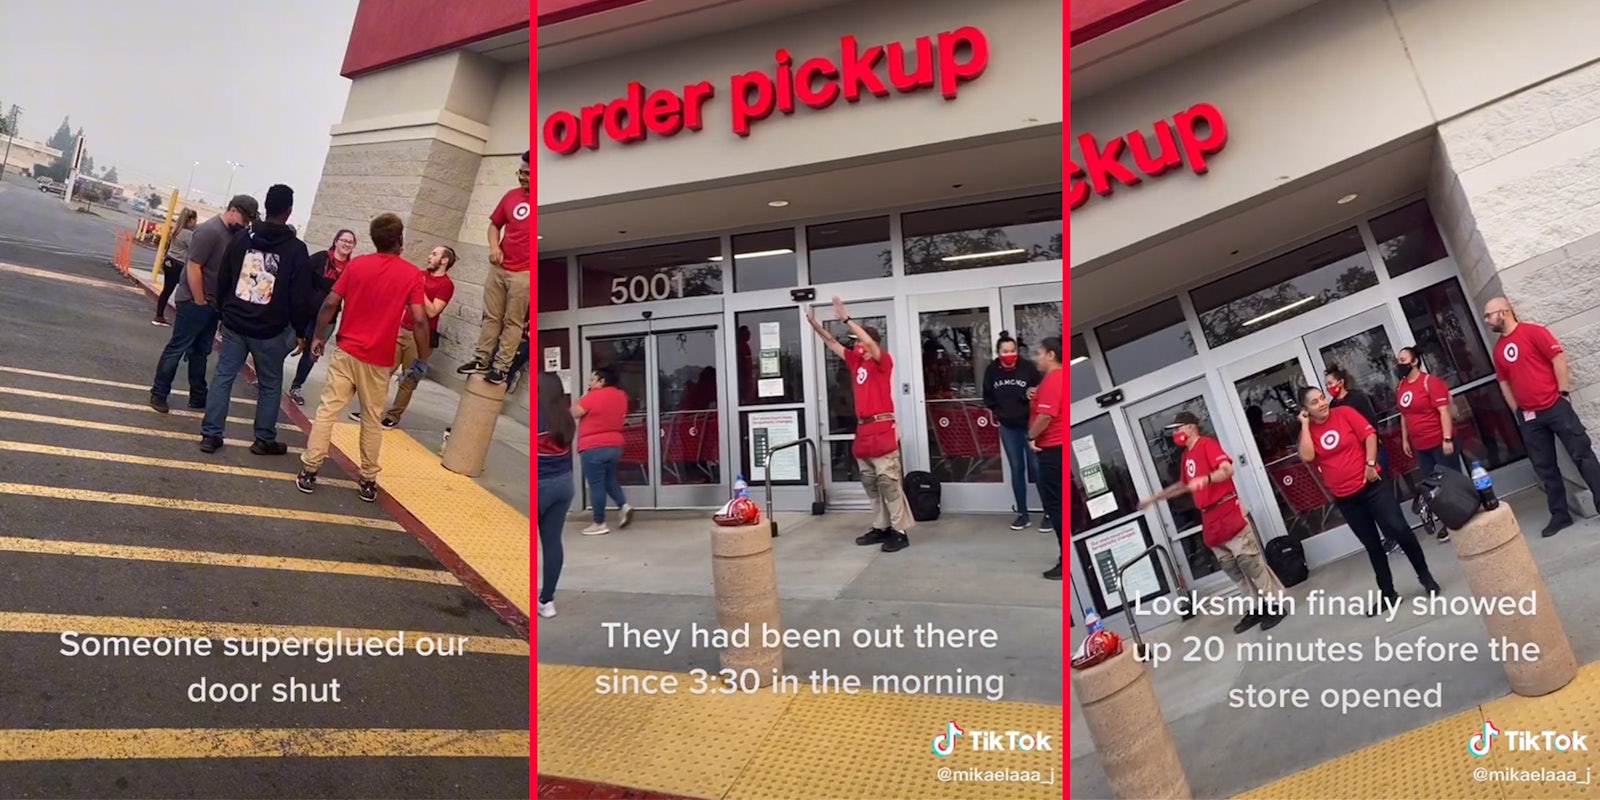 workers outside target with captions 'Someone superglued our door shut. They had been out there since 3:30 in the morning. Locksmith finally showed up 20 minutes before the store opened.'